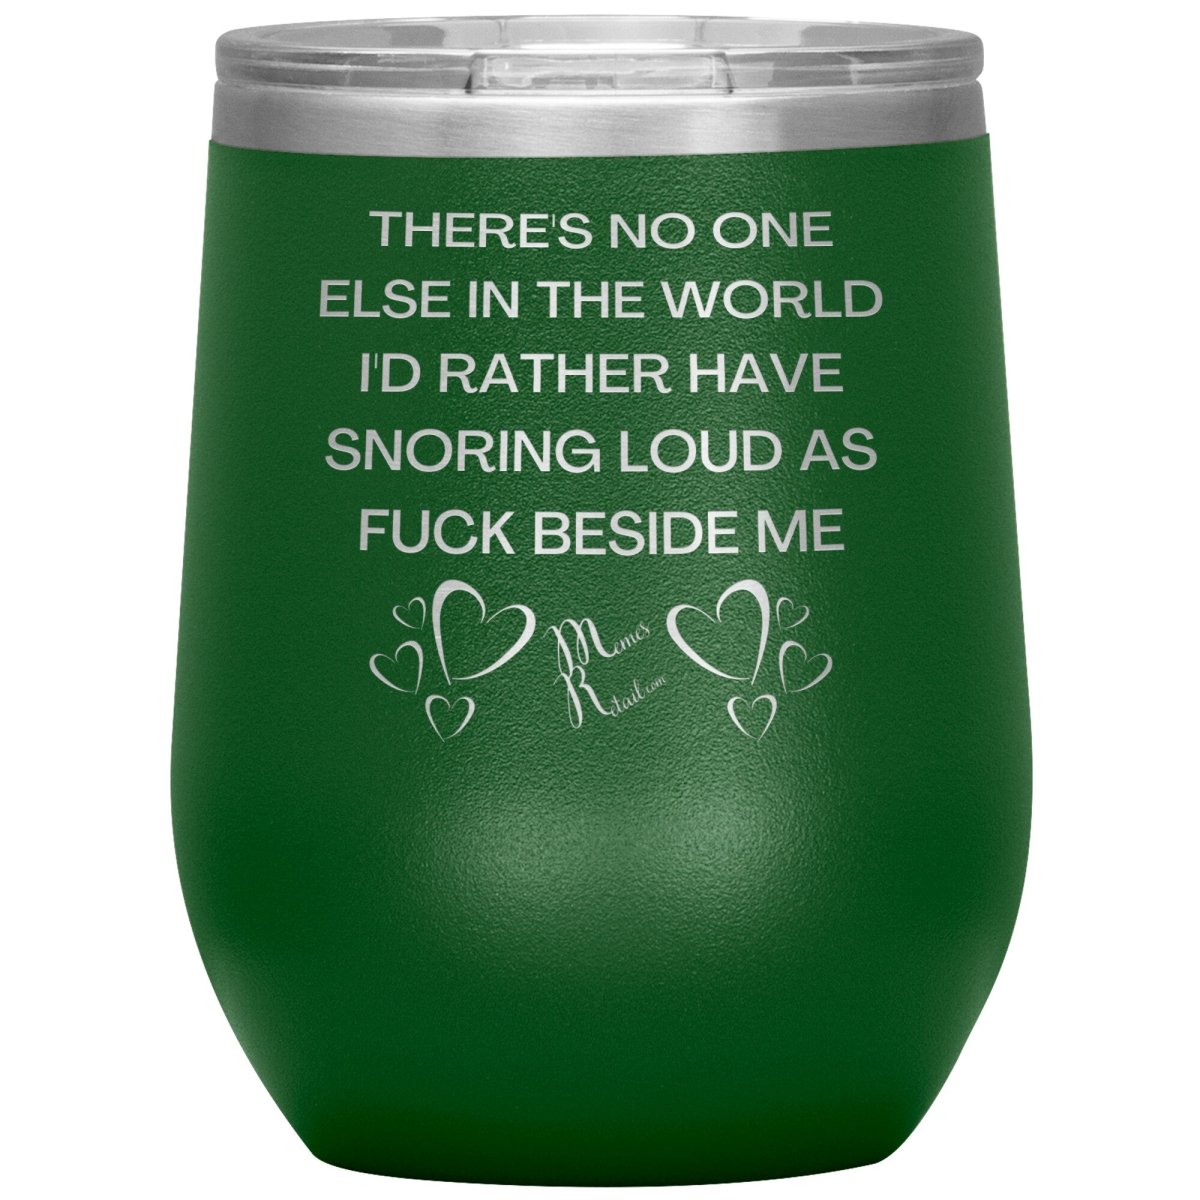 There's No One Else in the World I'd Rather Have Snoring Loud, 12oz Wine Insulated Tumbler / Green - MemesRetail.com